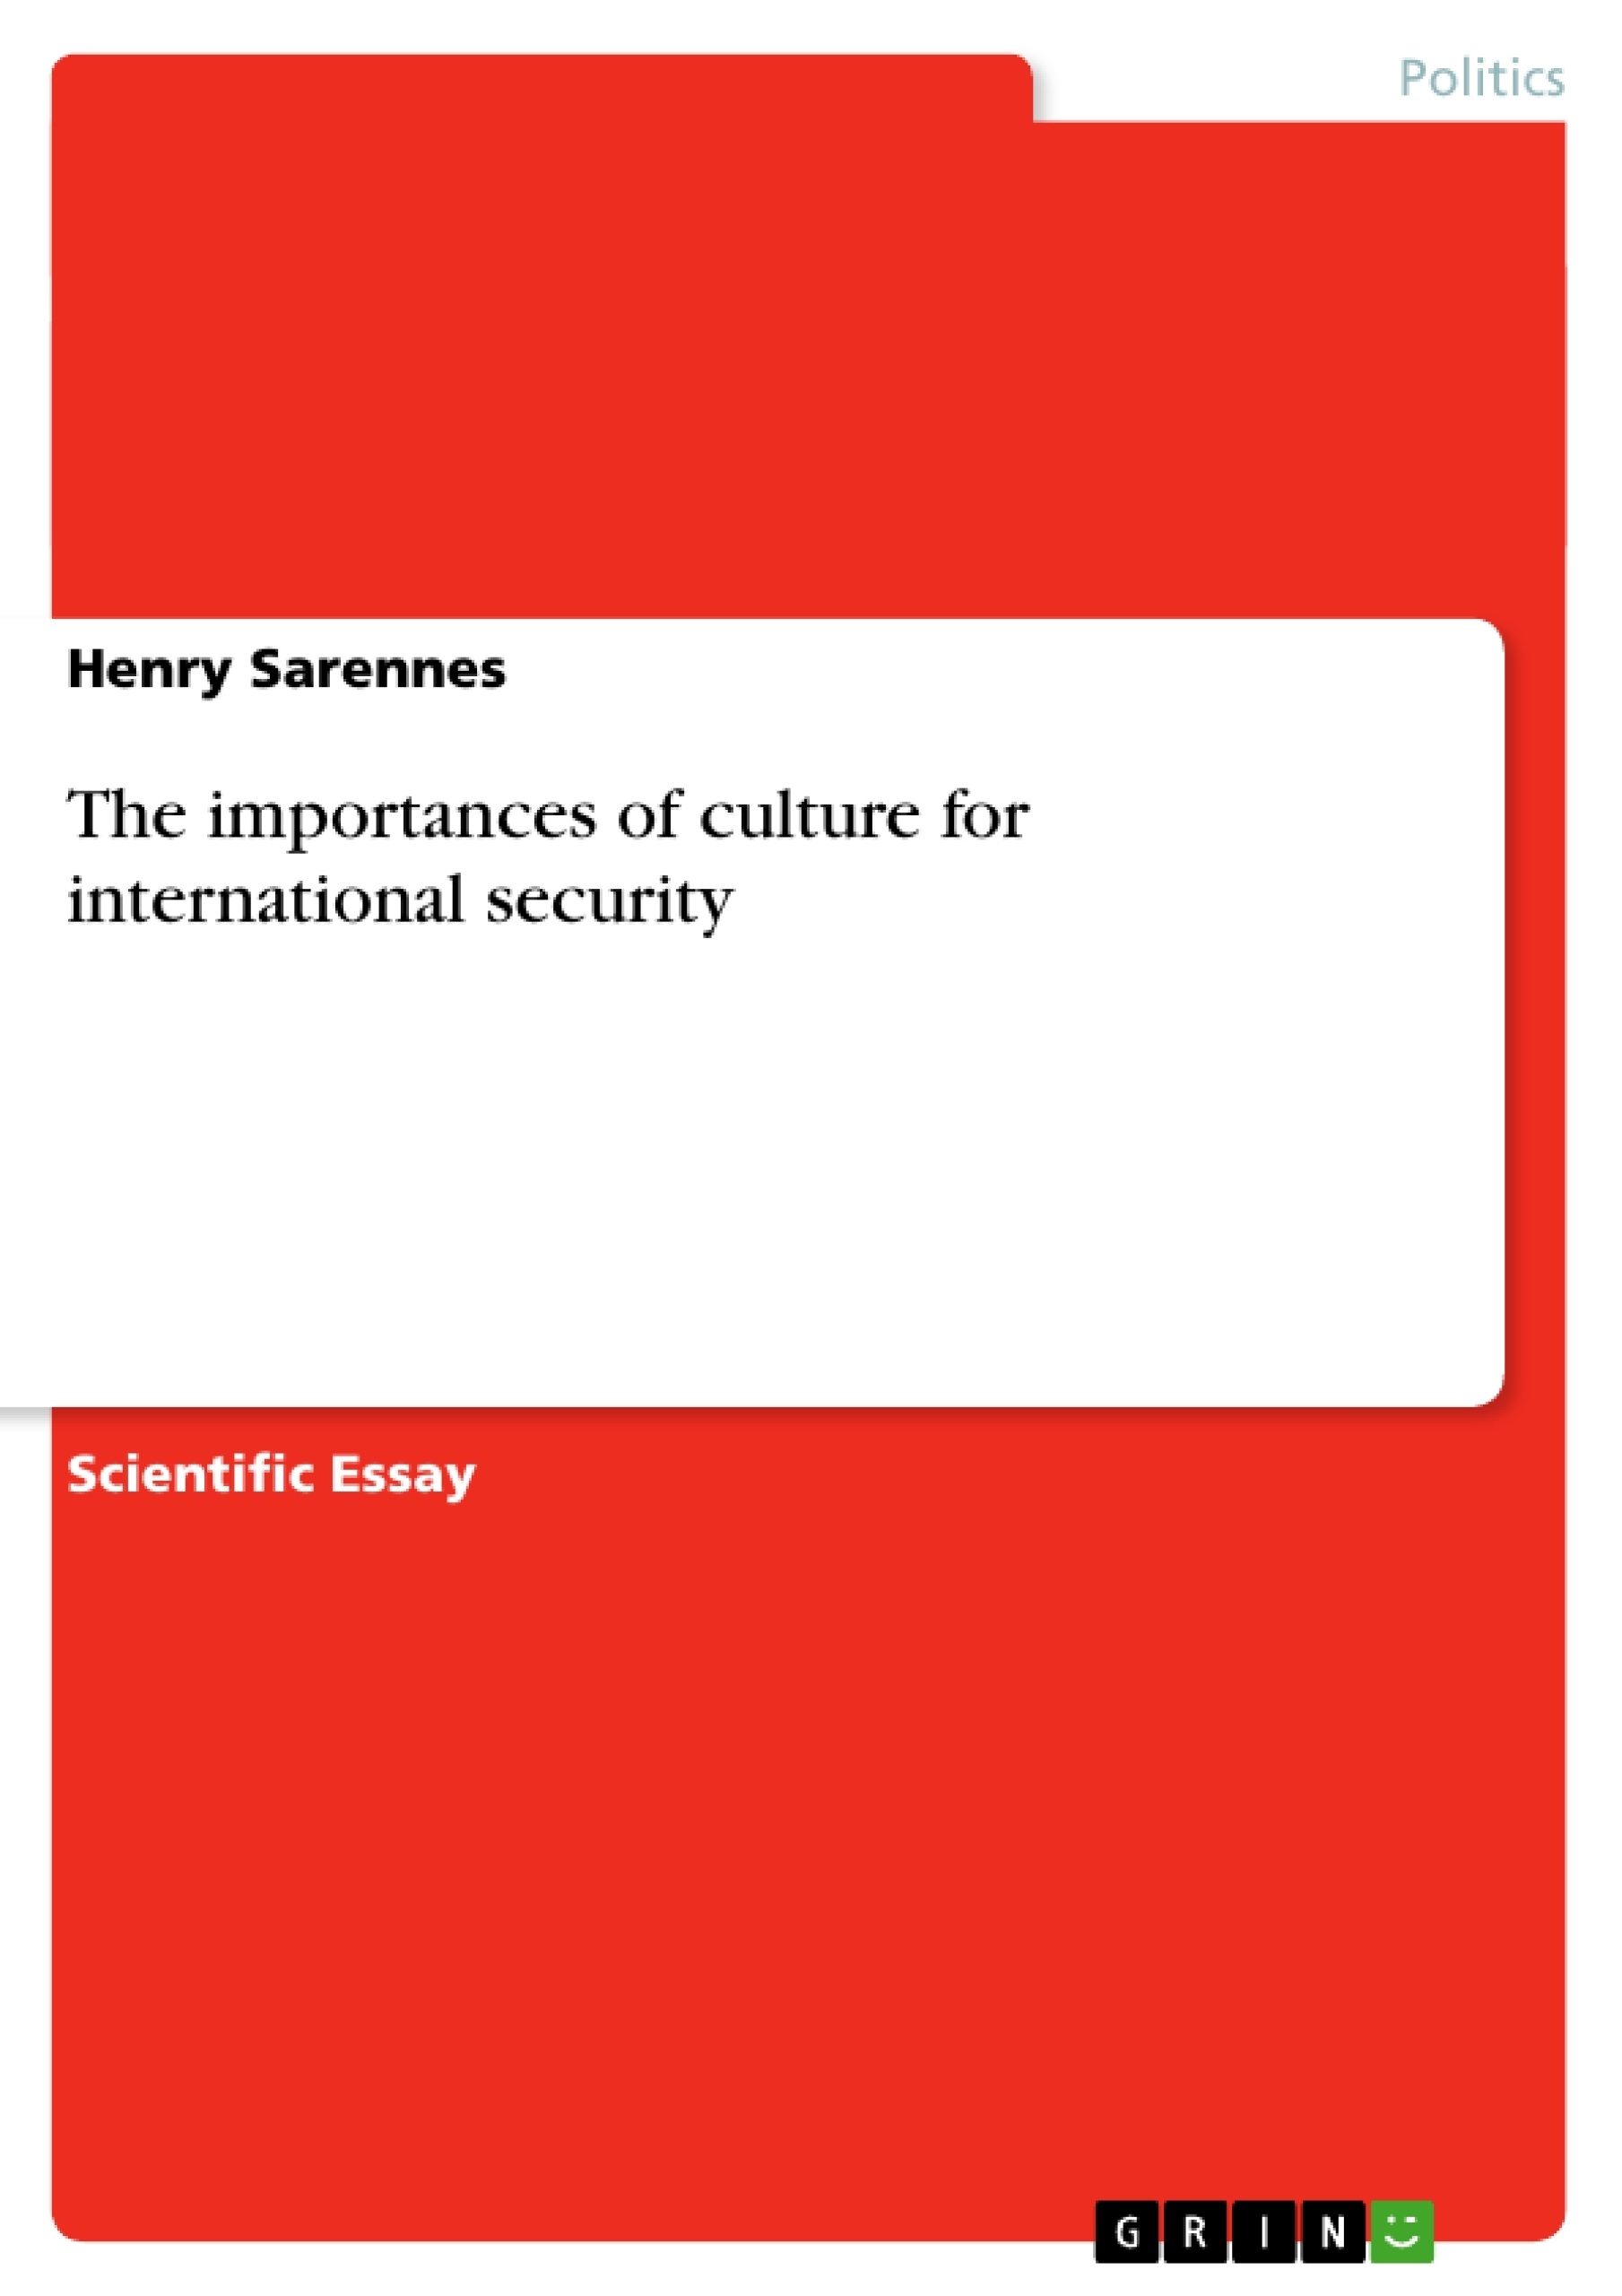 Título: The importances of culture for international security